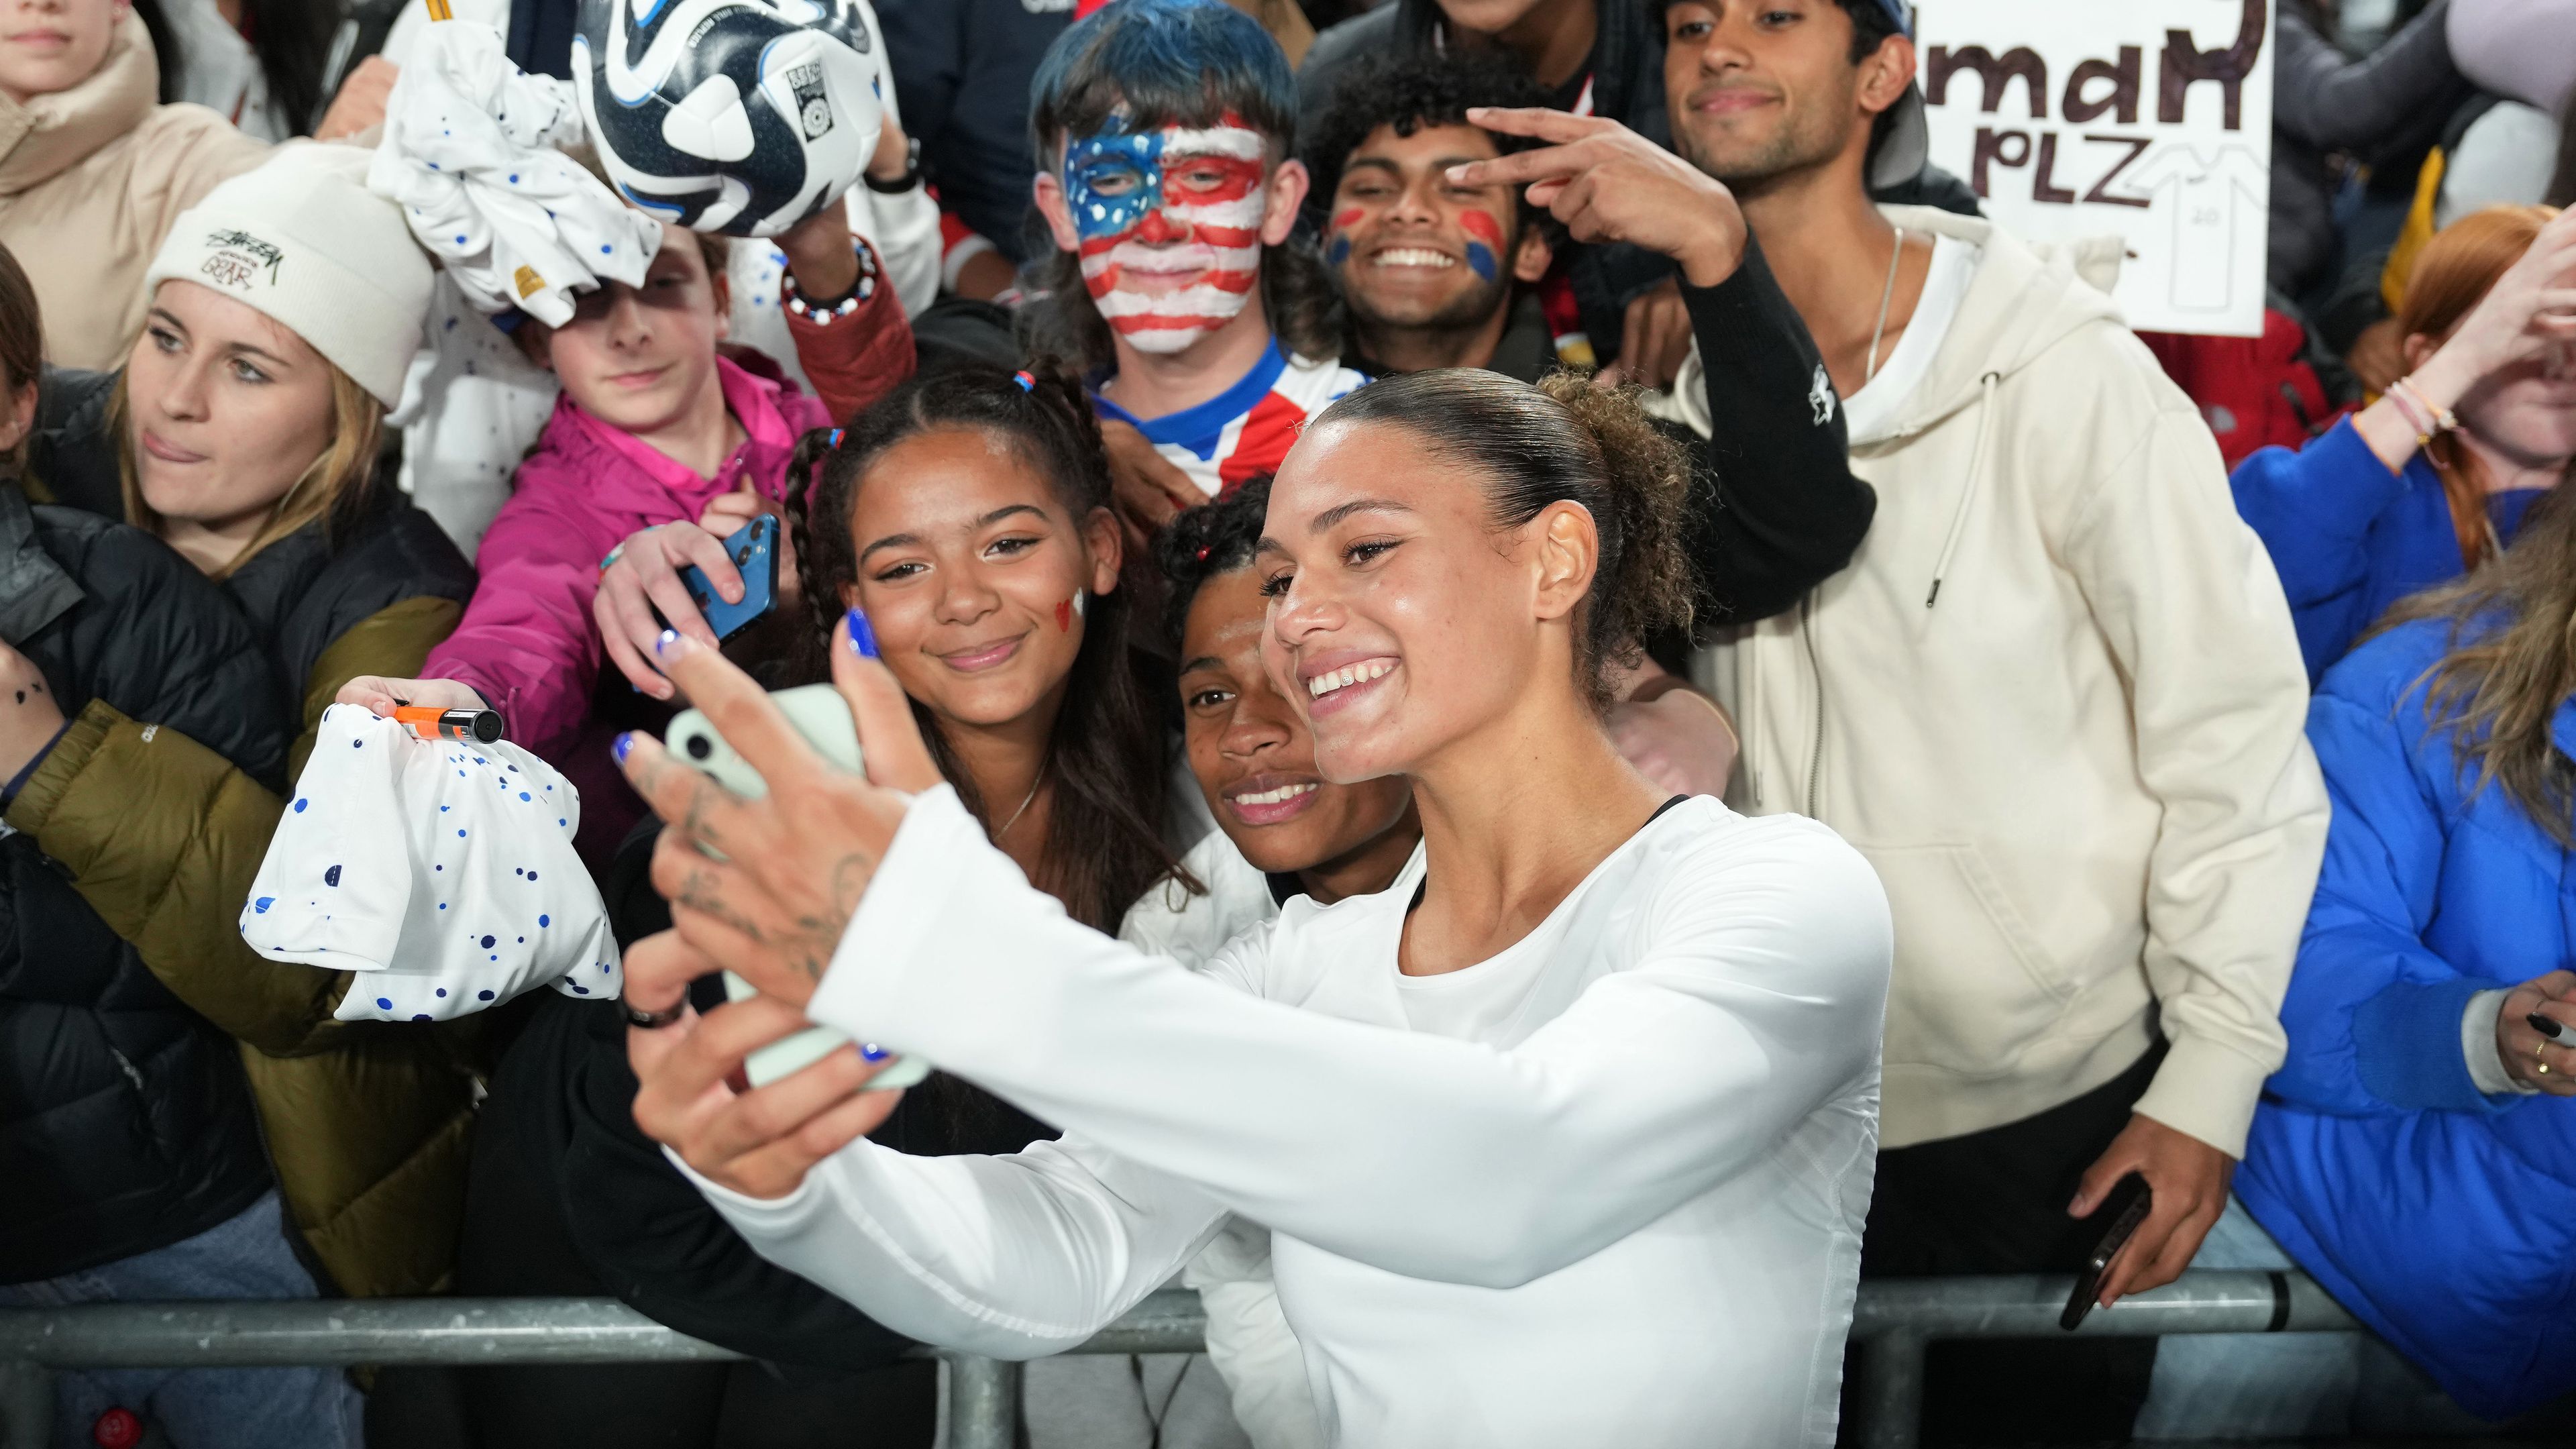 Trinity Rodman of the United States takes selfies with fans after losing to Portugal.